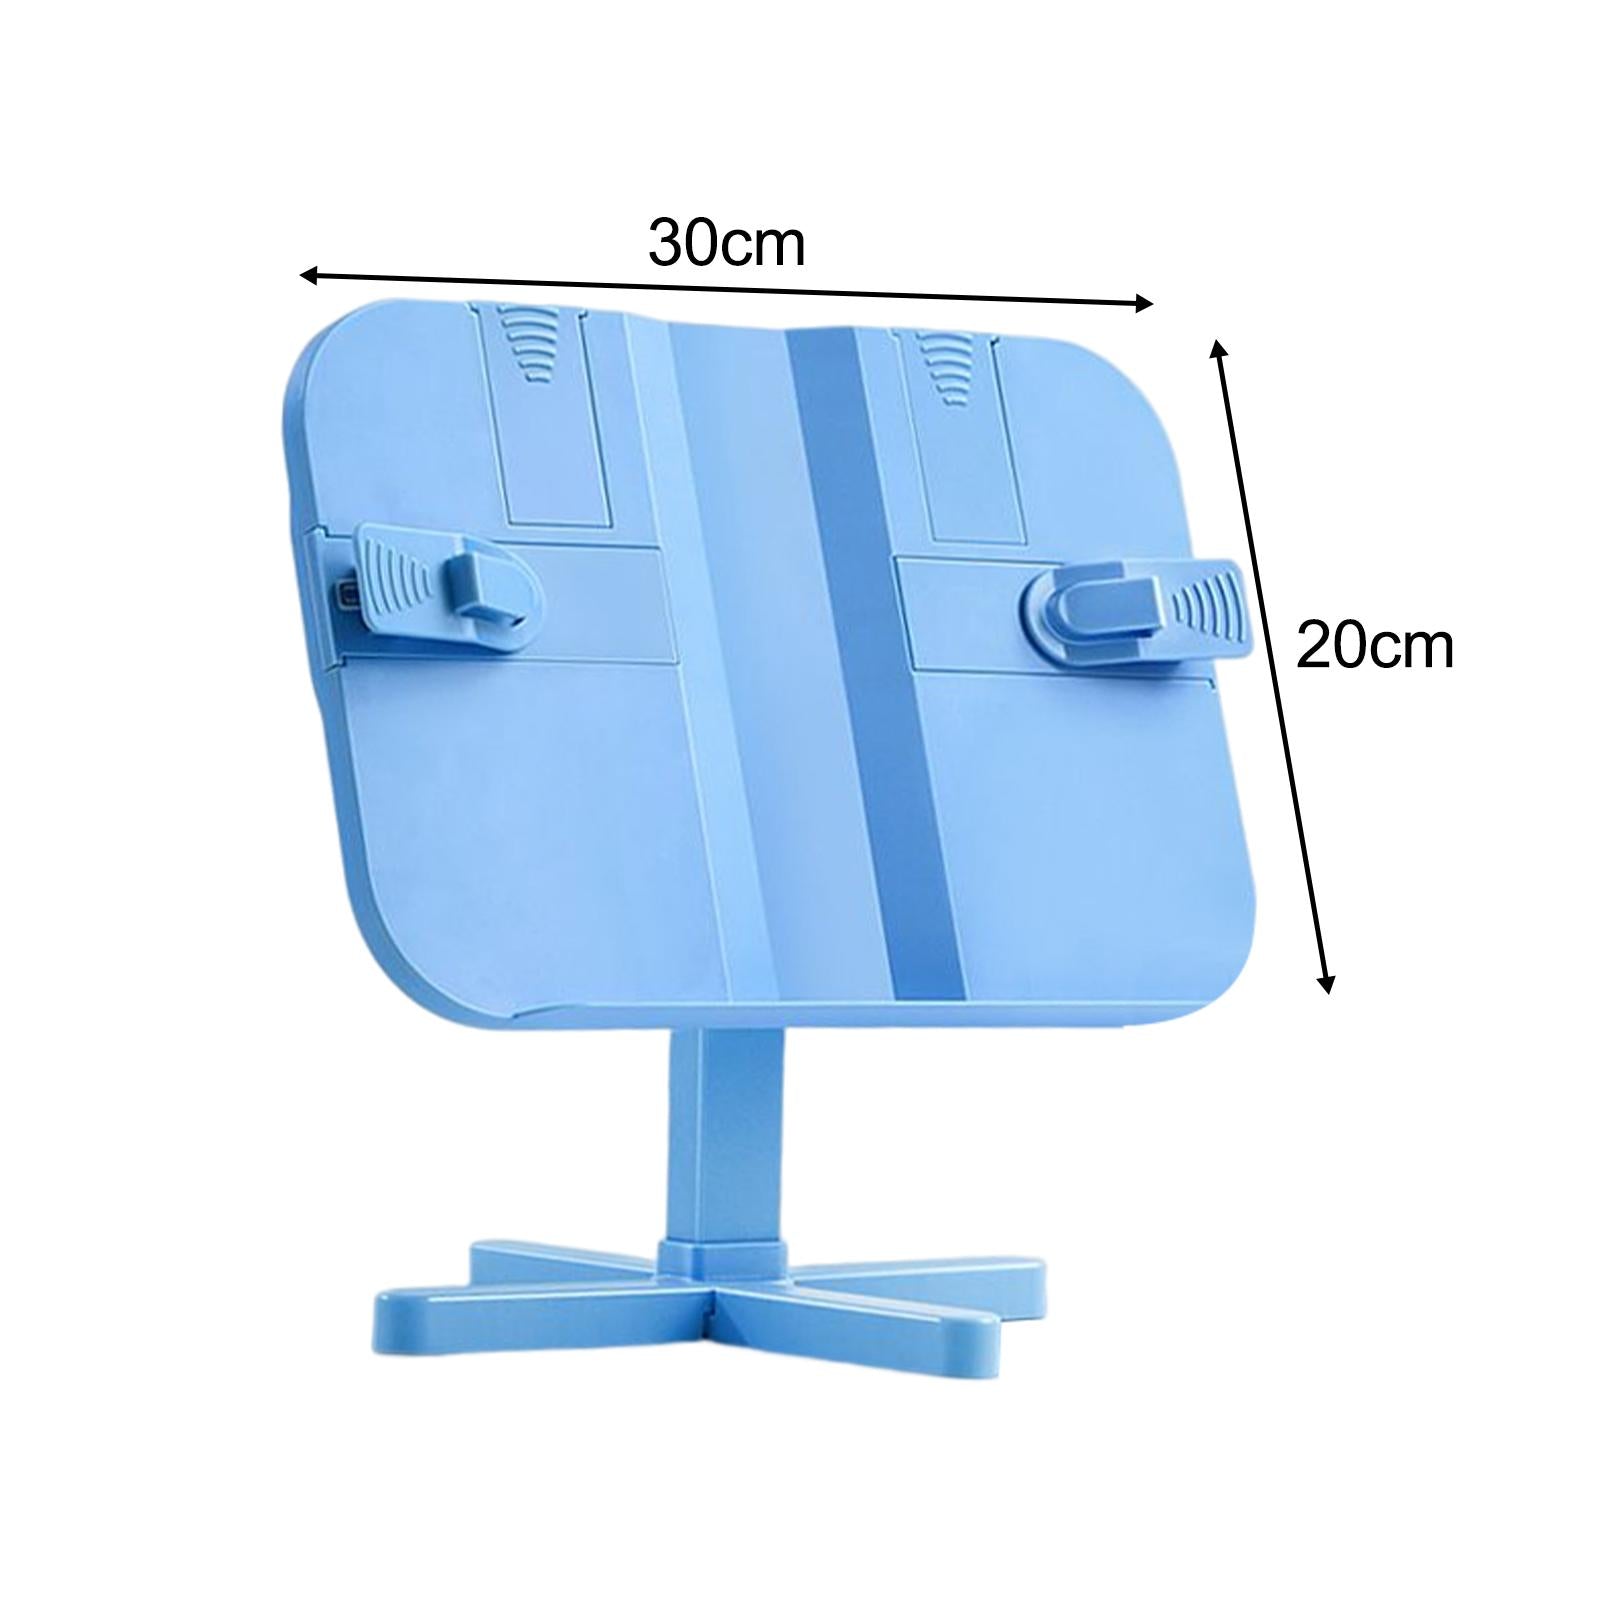 reading book stand Gifts Lightweight Shelf Reading Rest for Reading Recipes Adjustable Blue